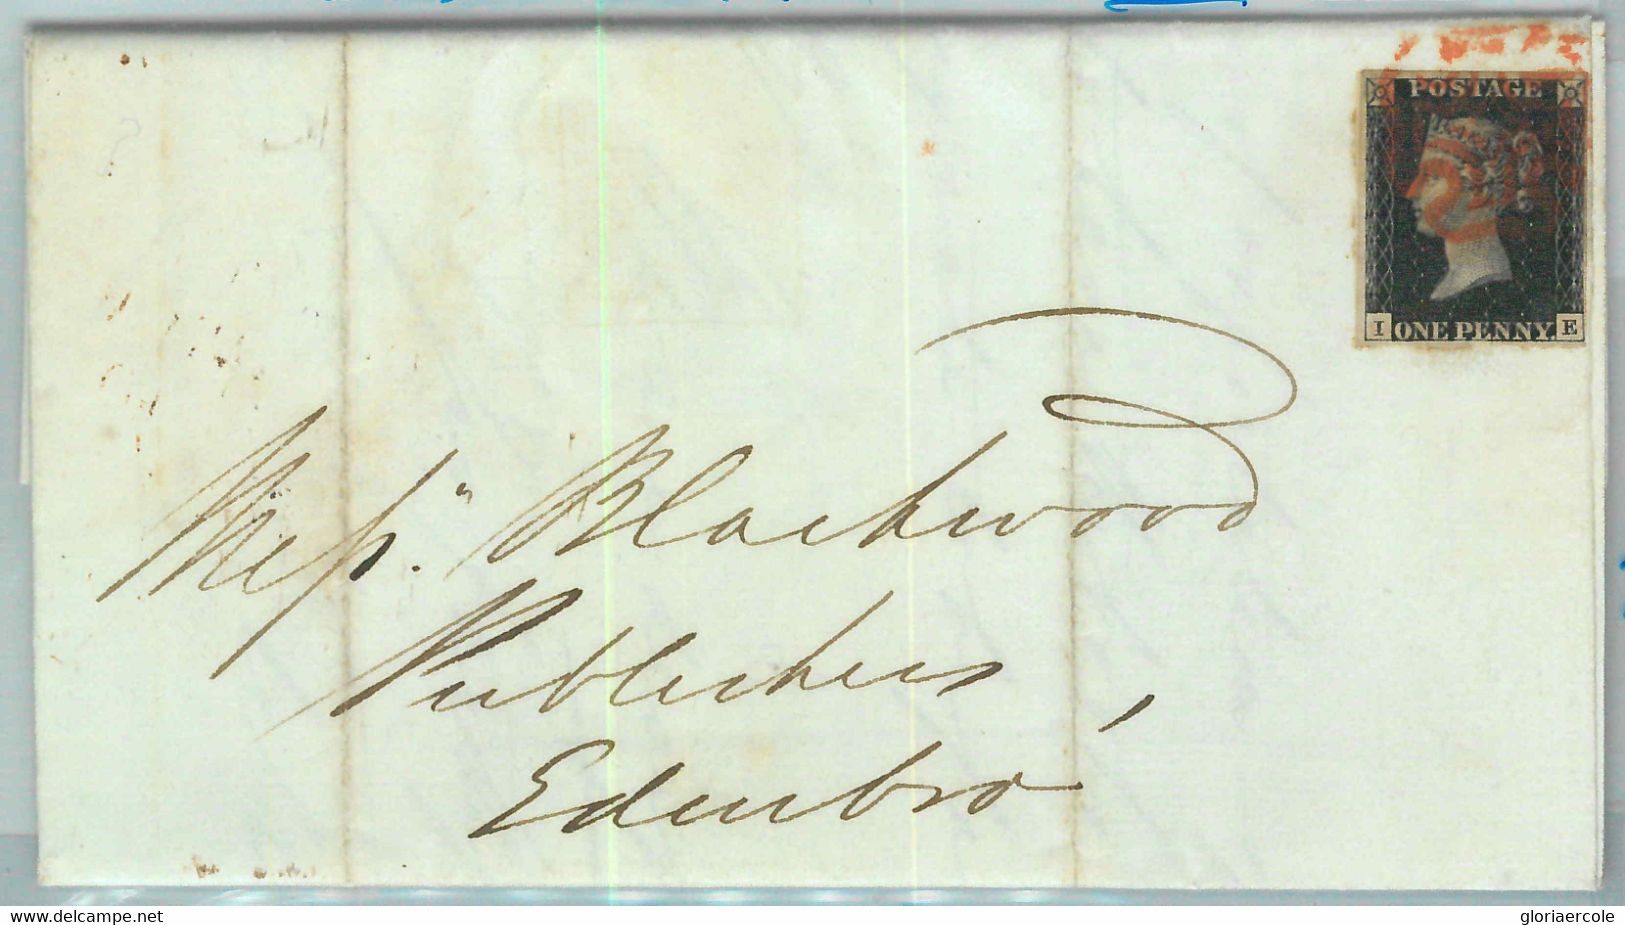 BK0660 - GB Great Brittain - POSTAL HISTORY - PENNY BLACK  On COVER October 1840 - Lettres & Documents